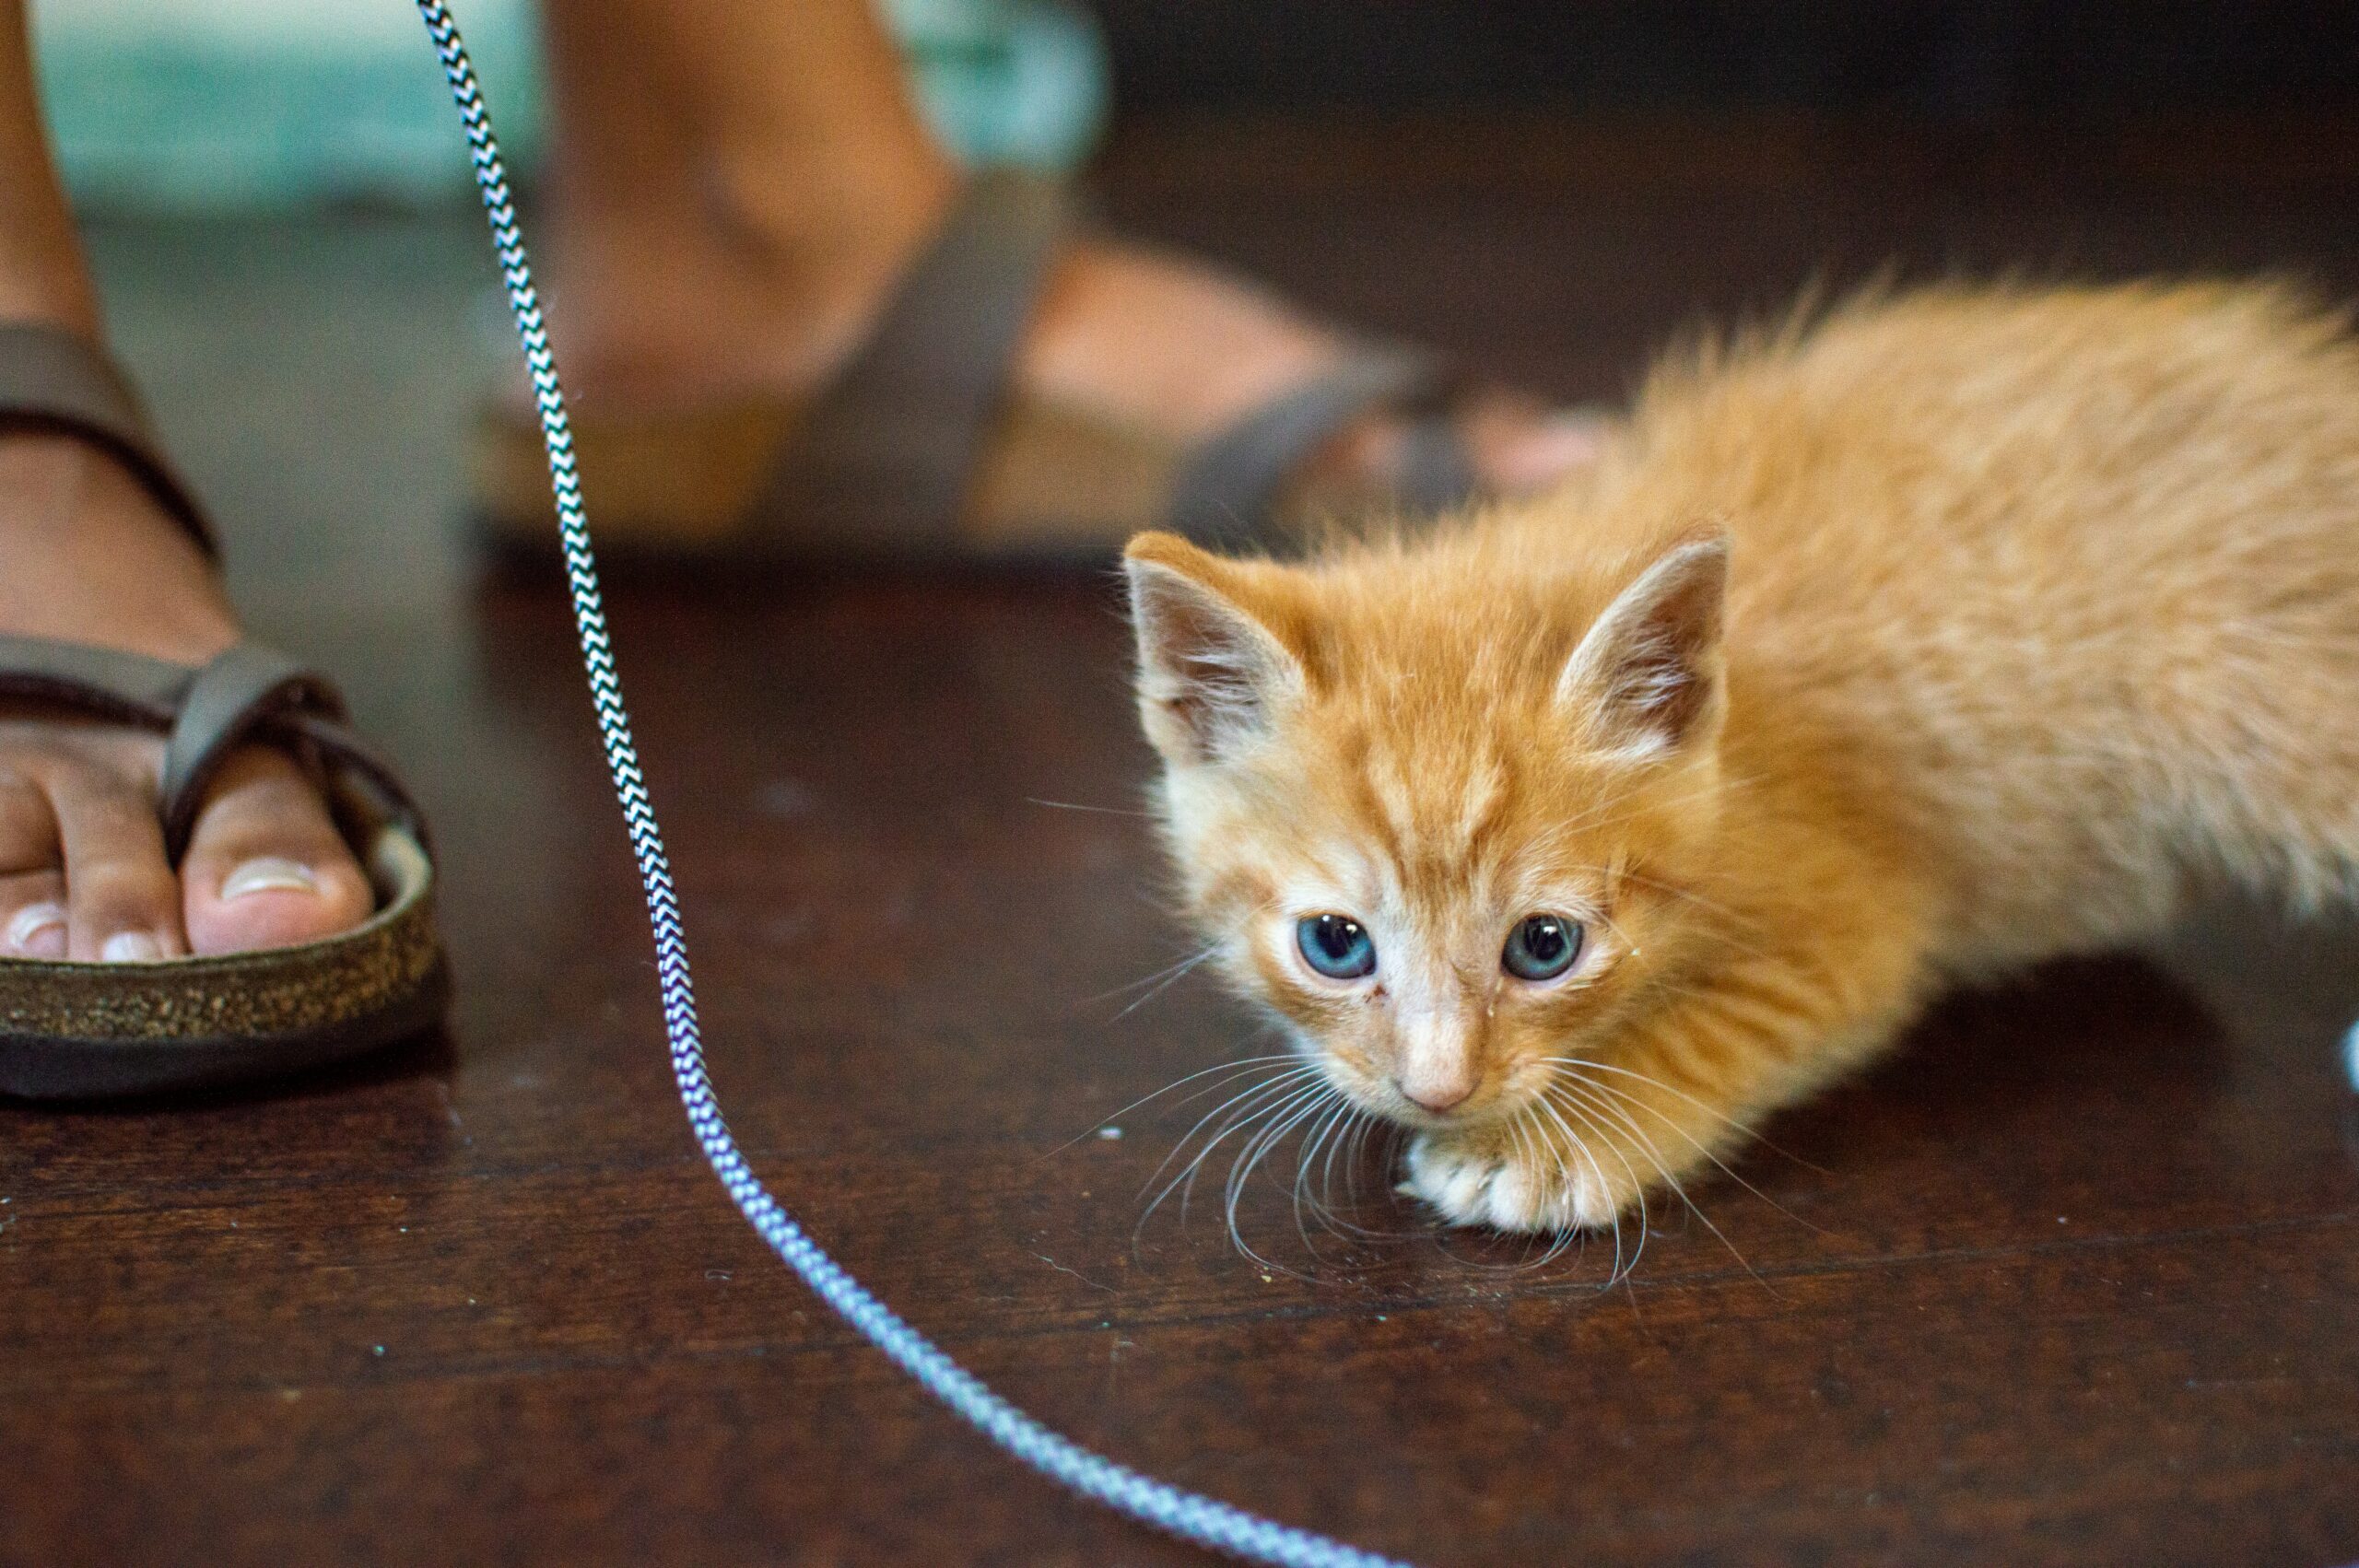 Little orange kitten playing stalking a string. Person's feet in the background.